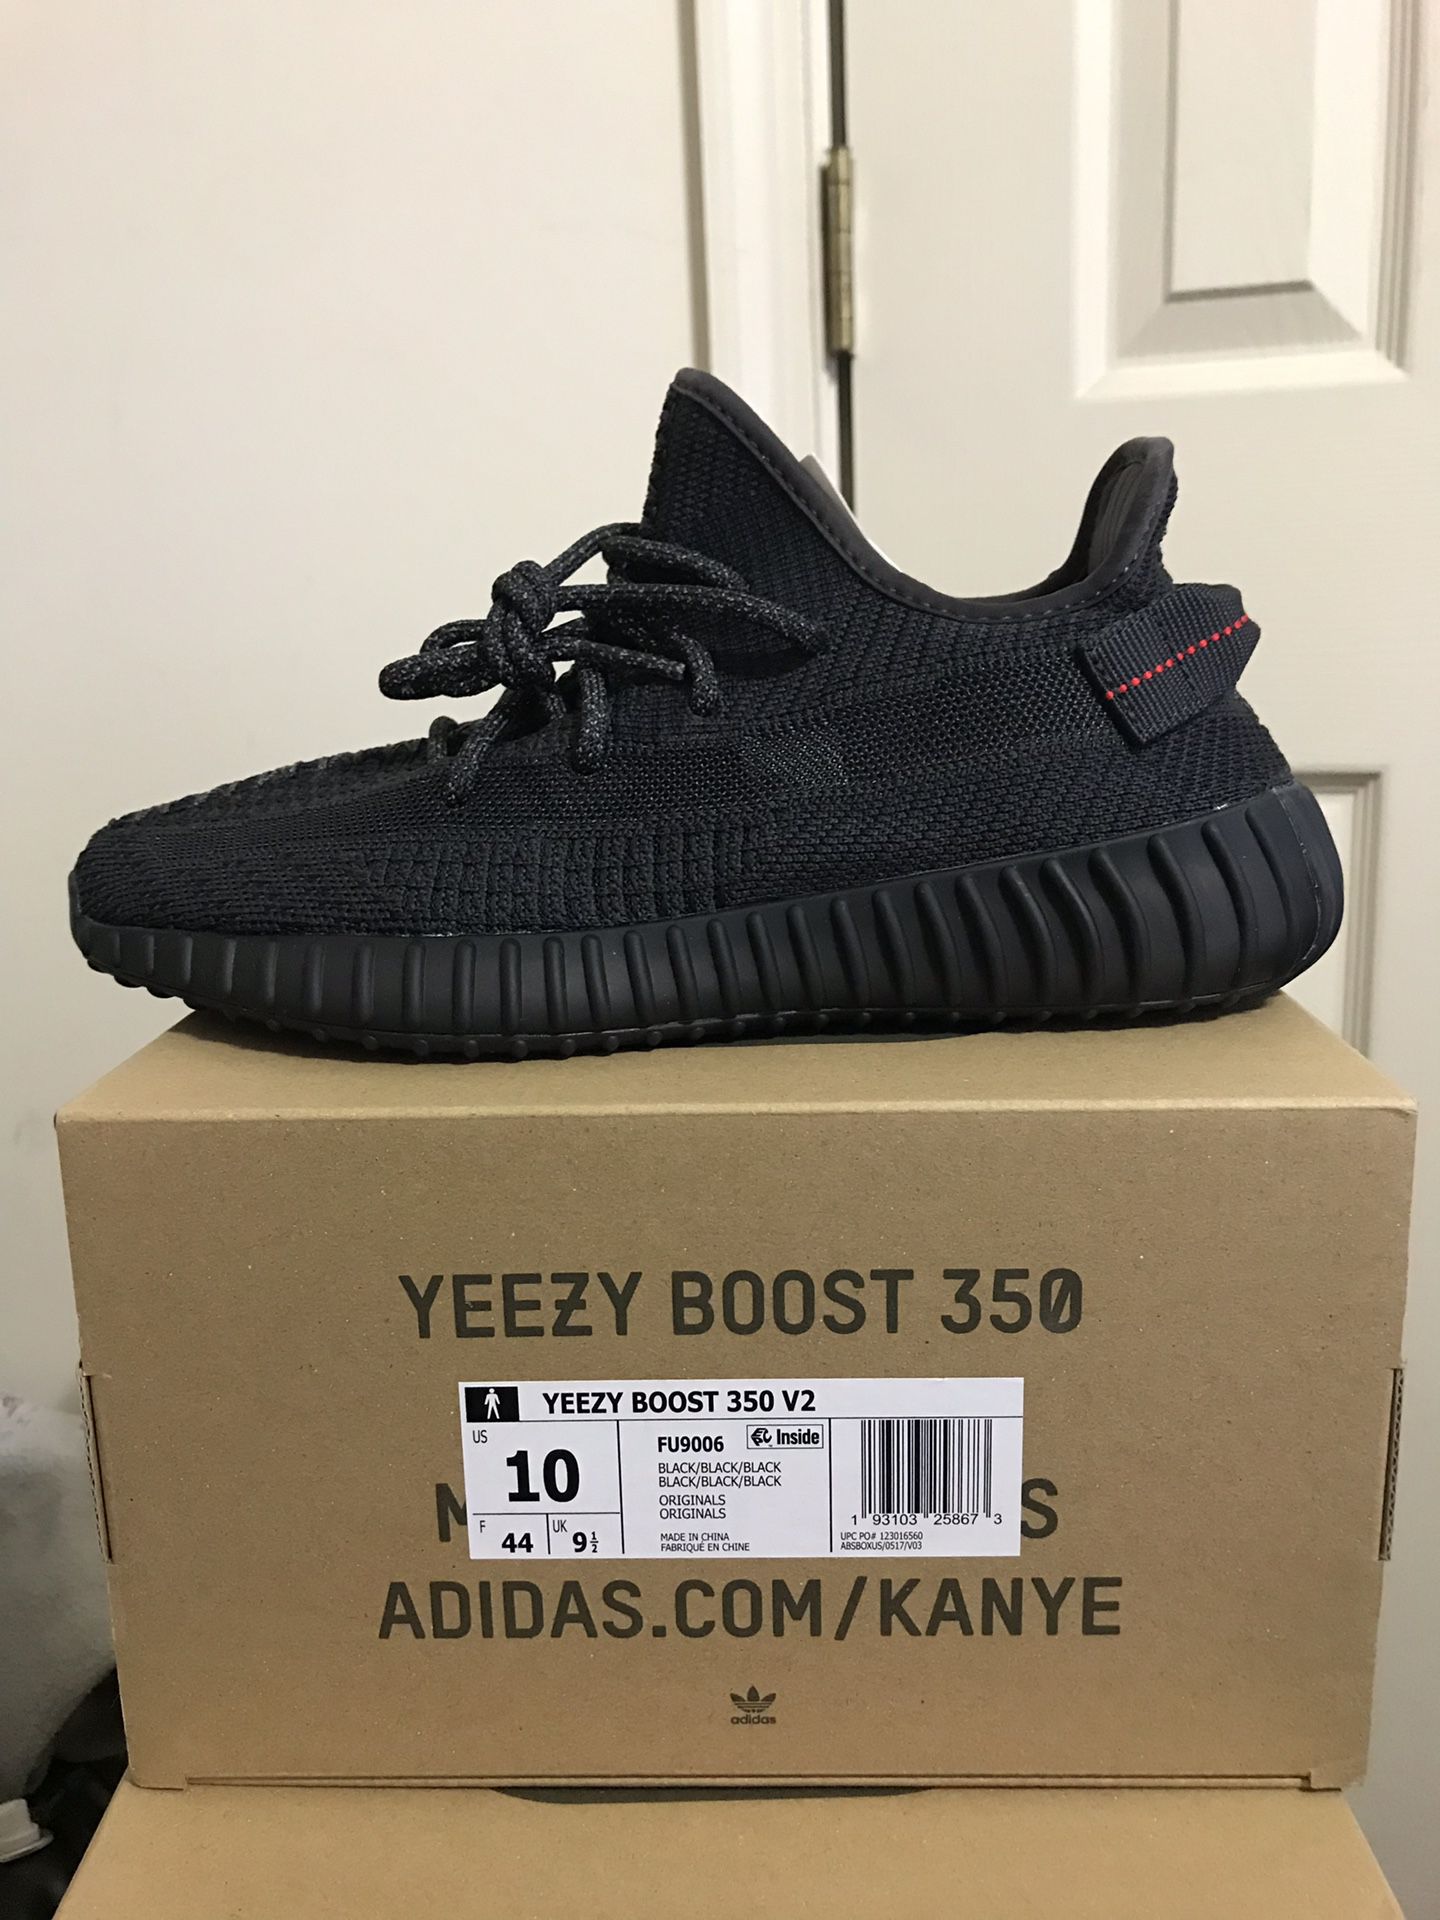 NEW ADIDAS YEEZY BOOST 350 V2 NON REFLECTING SIZE 10